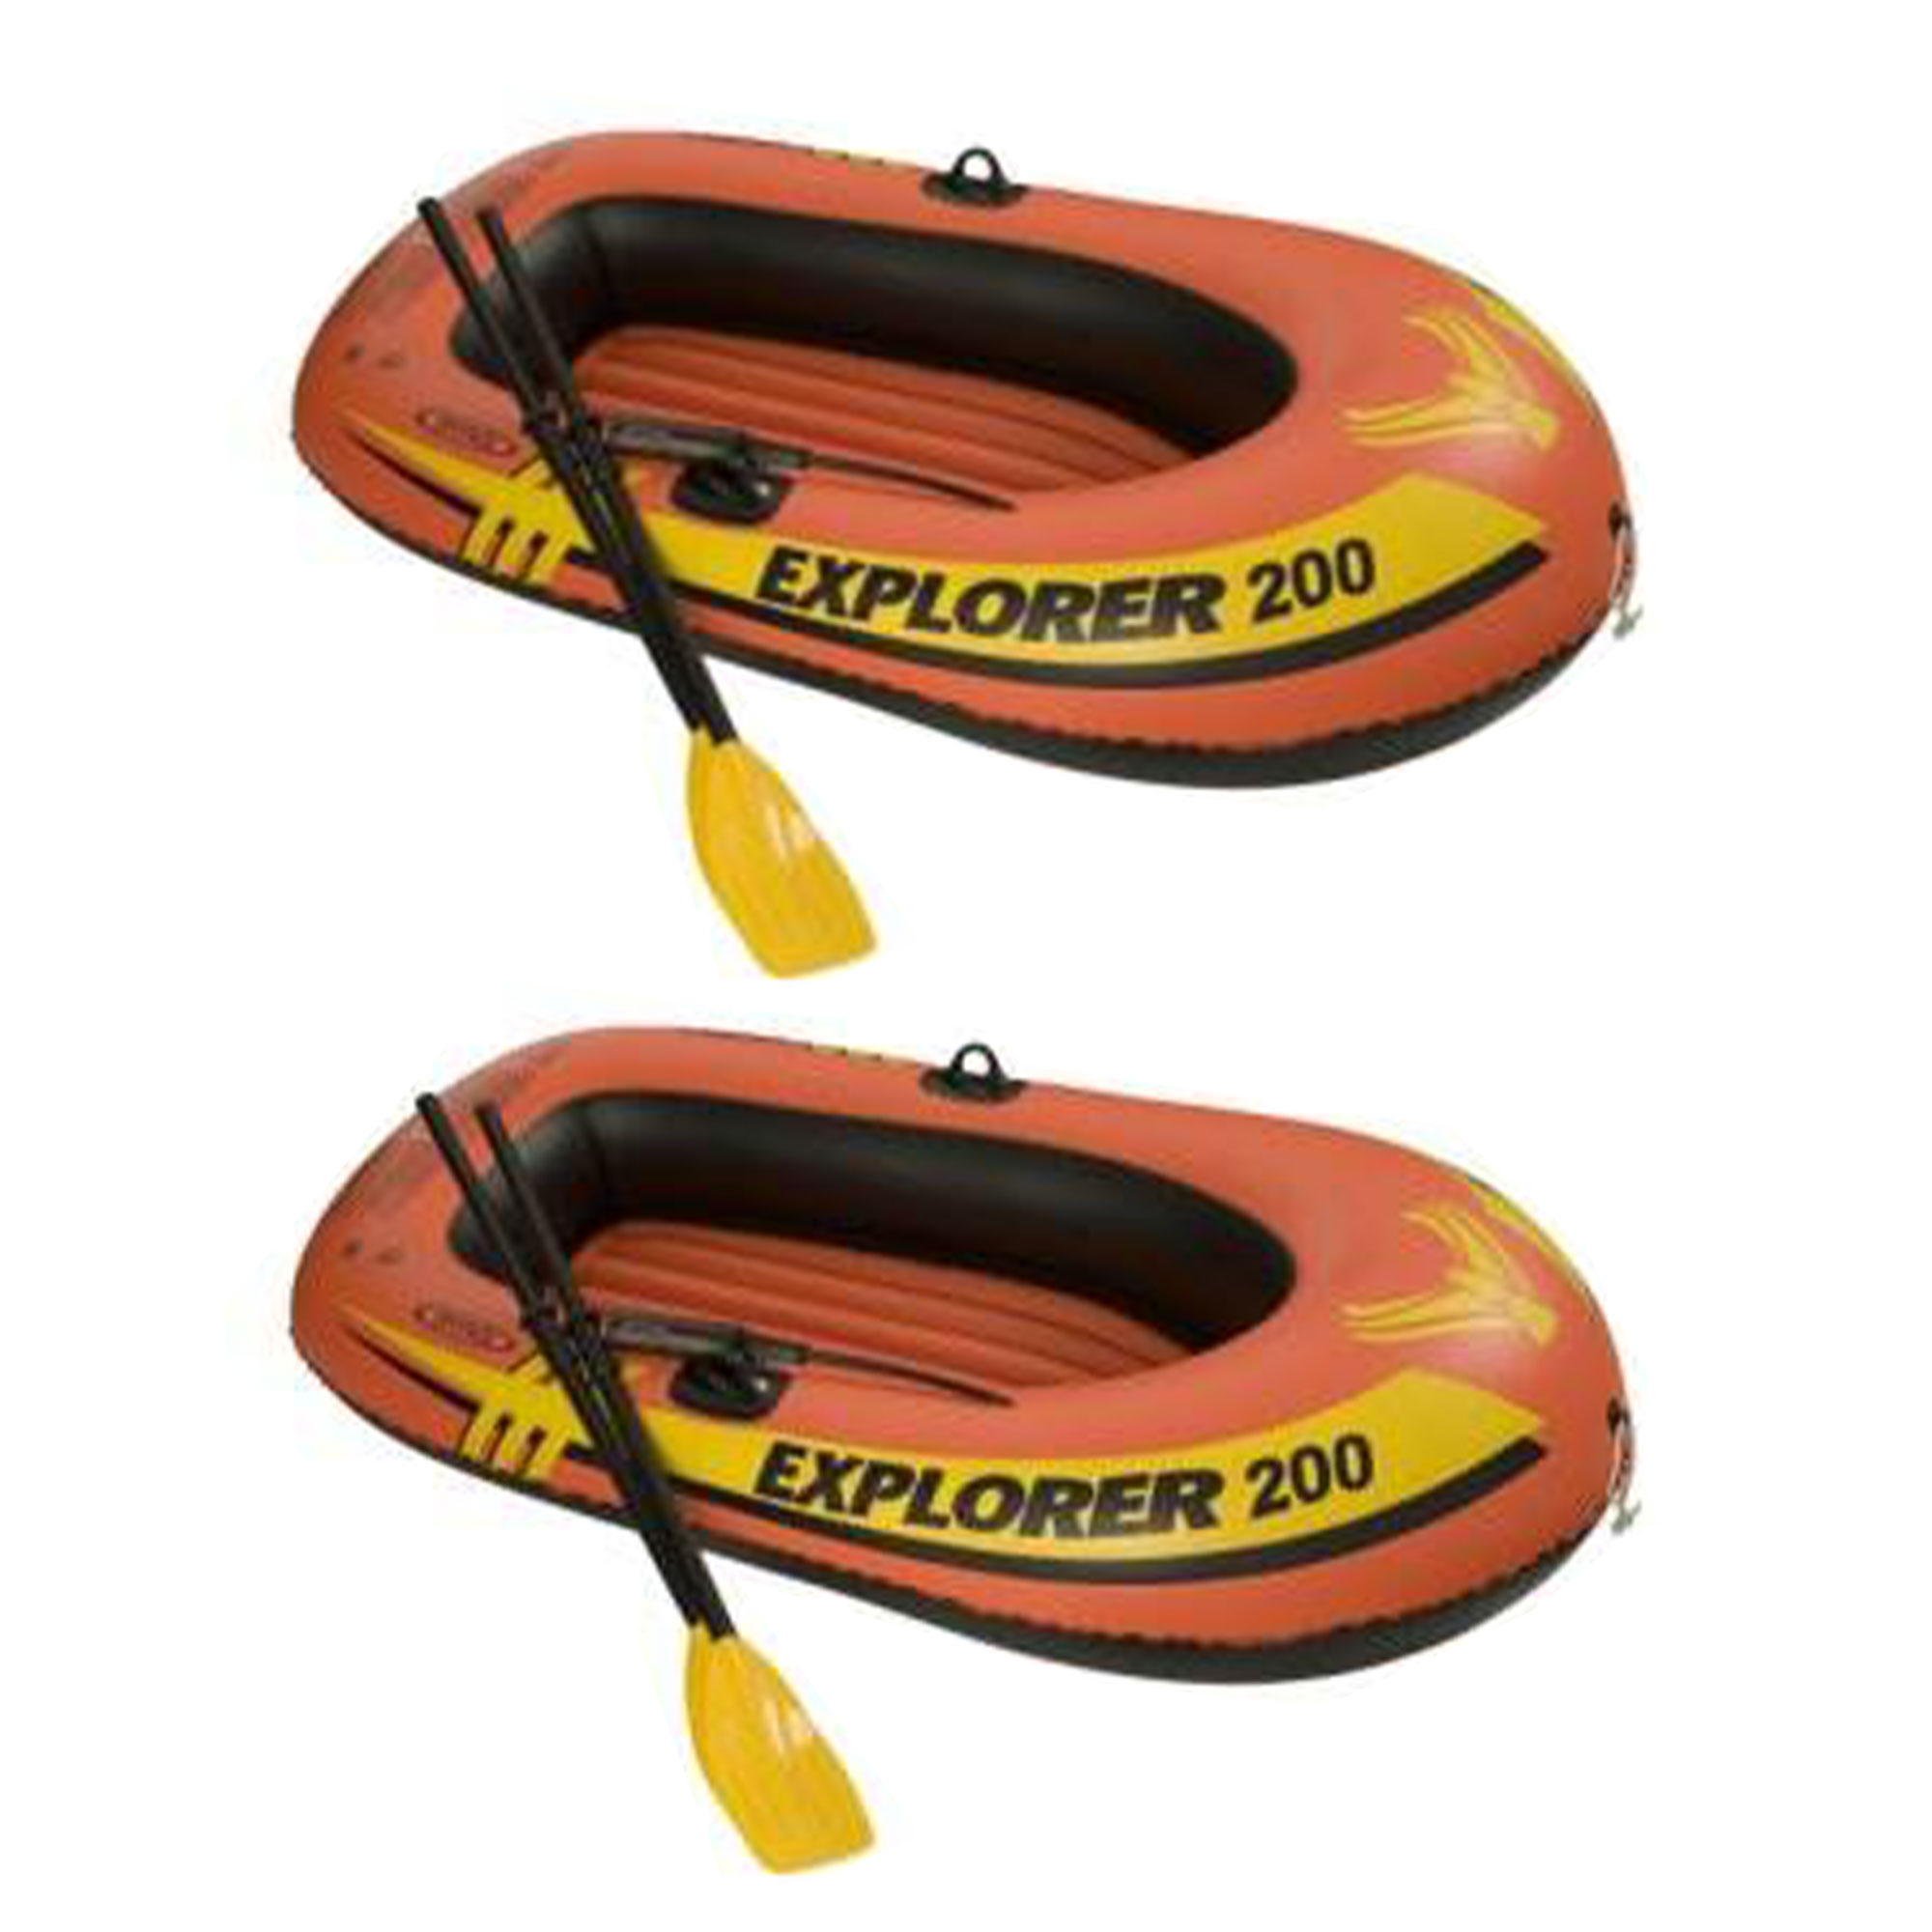 Intex Explorer 200 Inflatable 2 Person River Boat Raft w/ Oars & Pump (2 Pack) - image 1 of 6